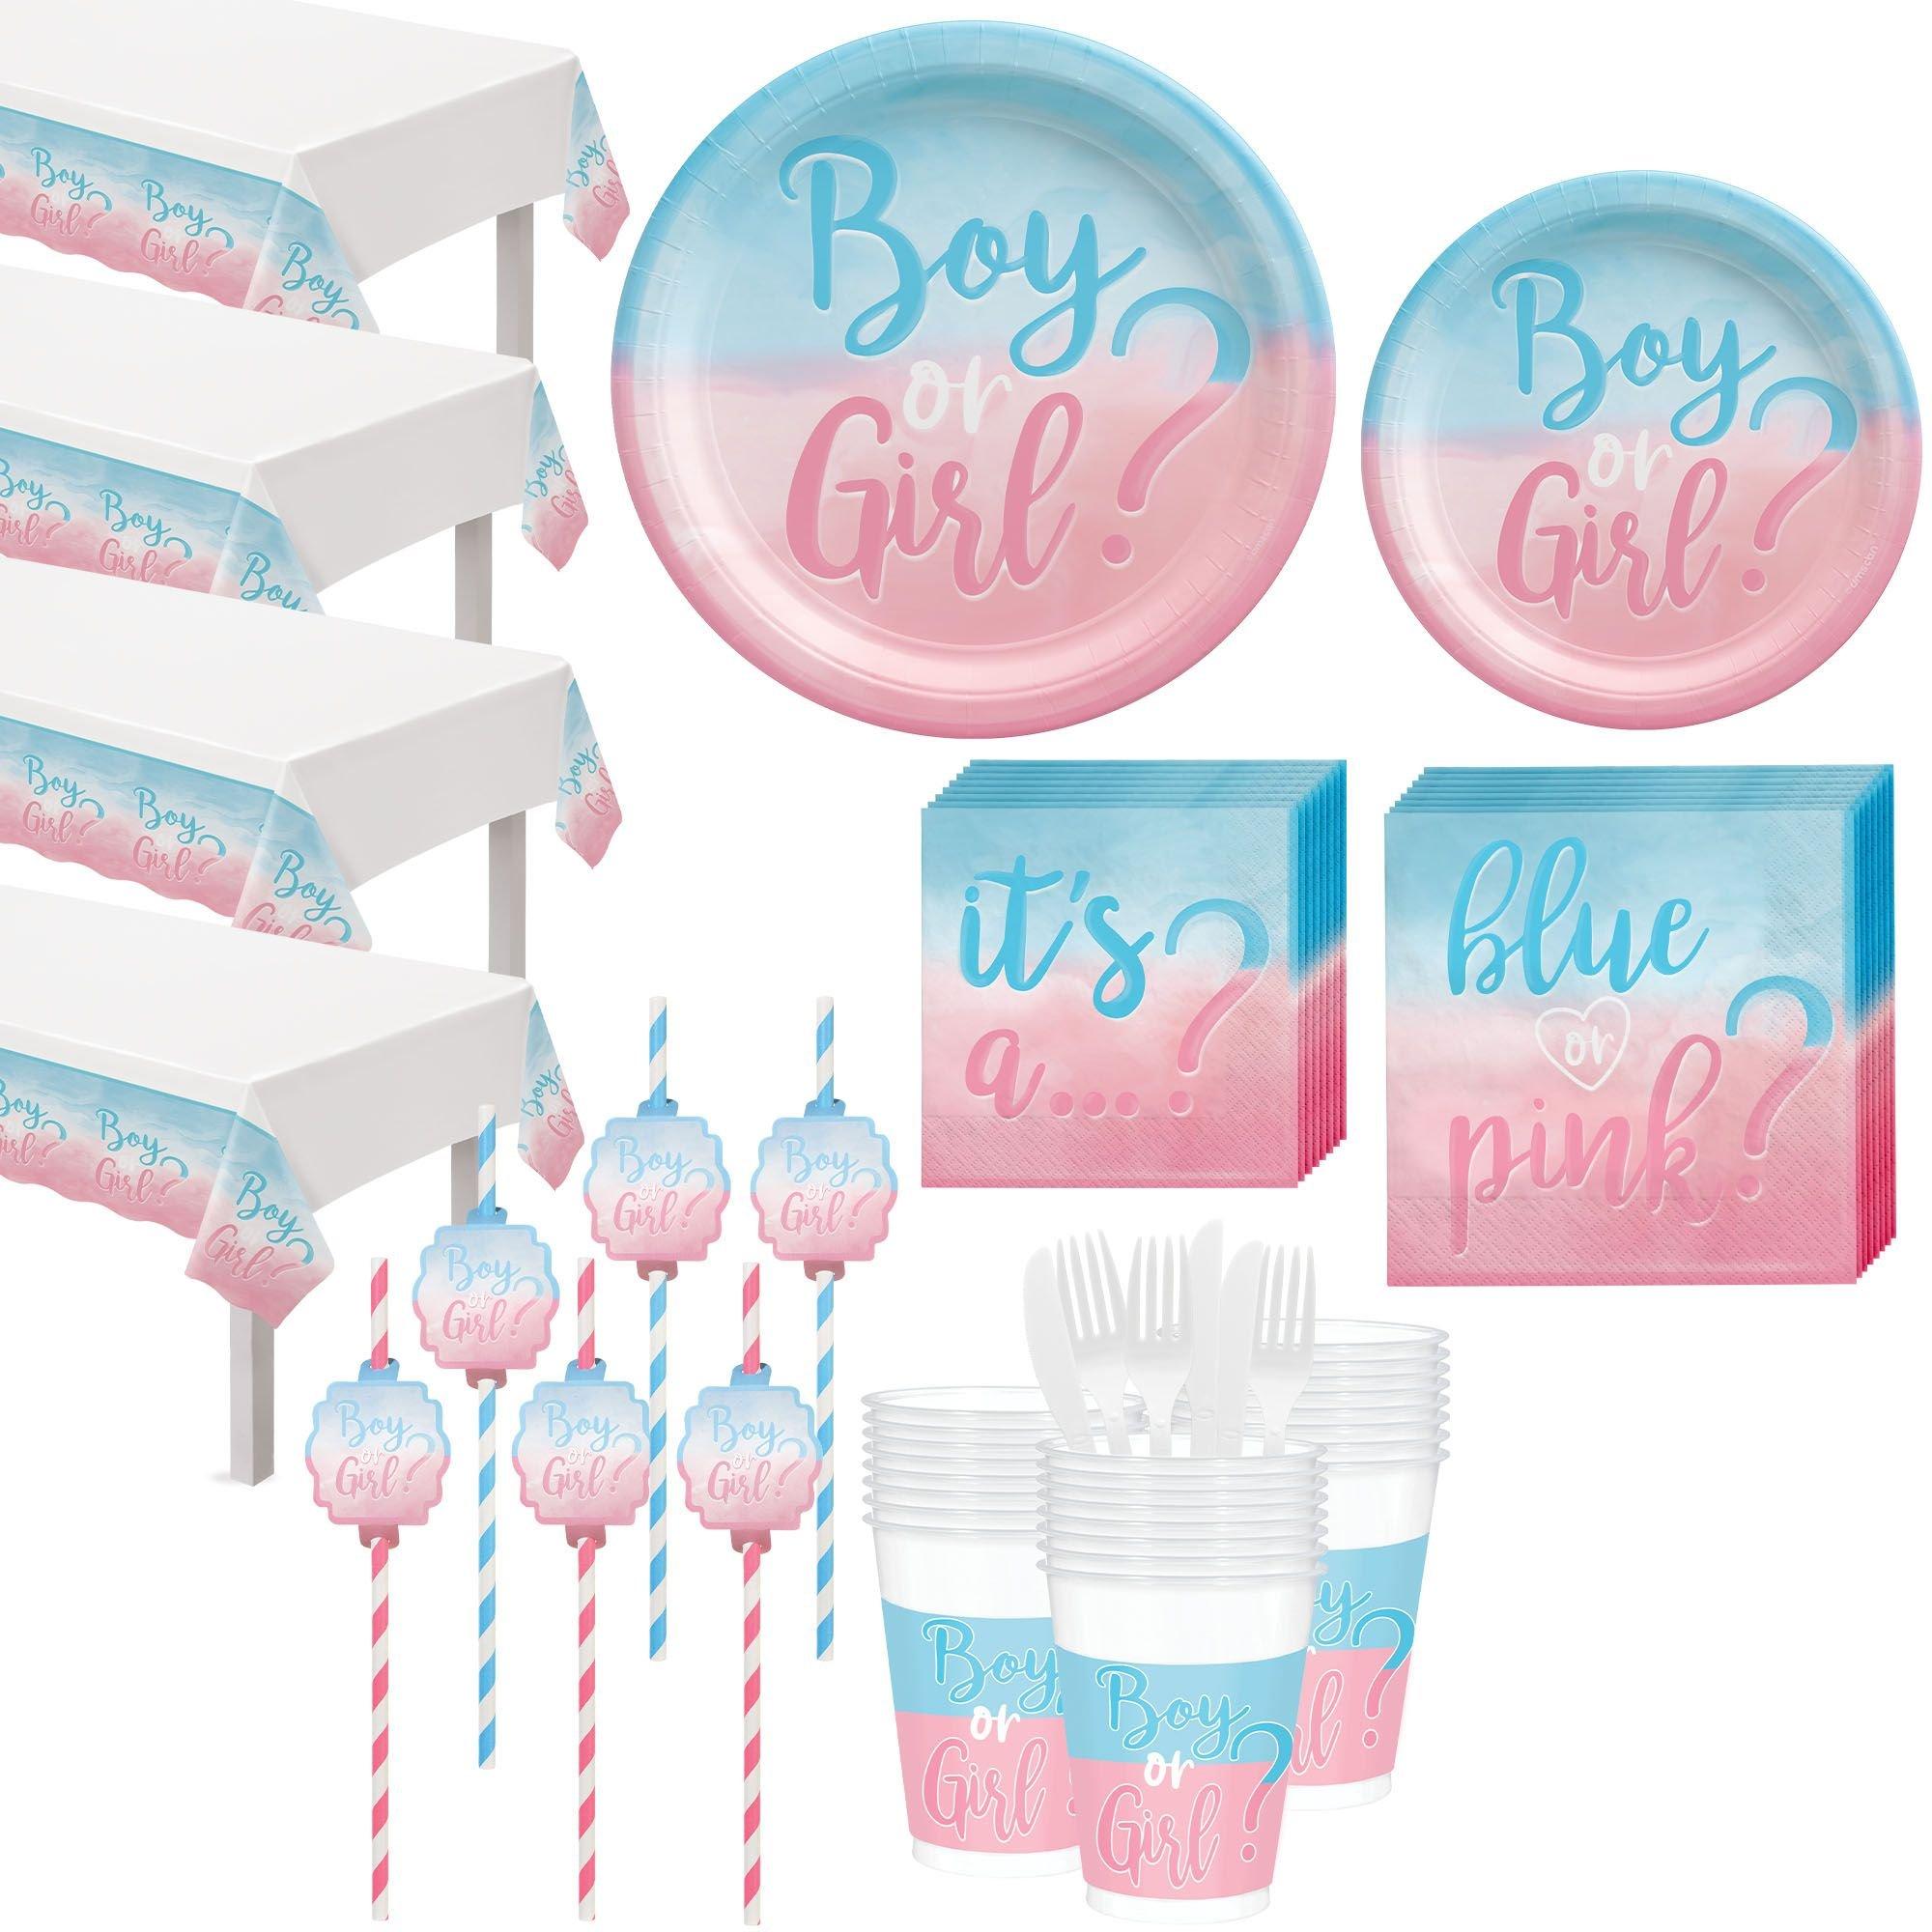 Girl Gender Reveal Decorations & Accessories Kit for 10 Guests